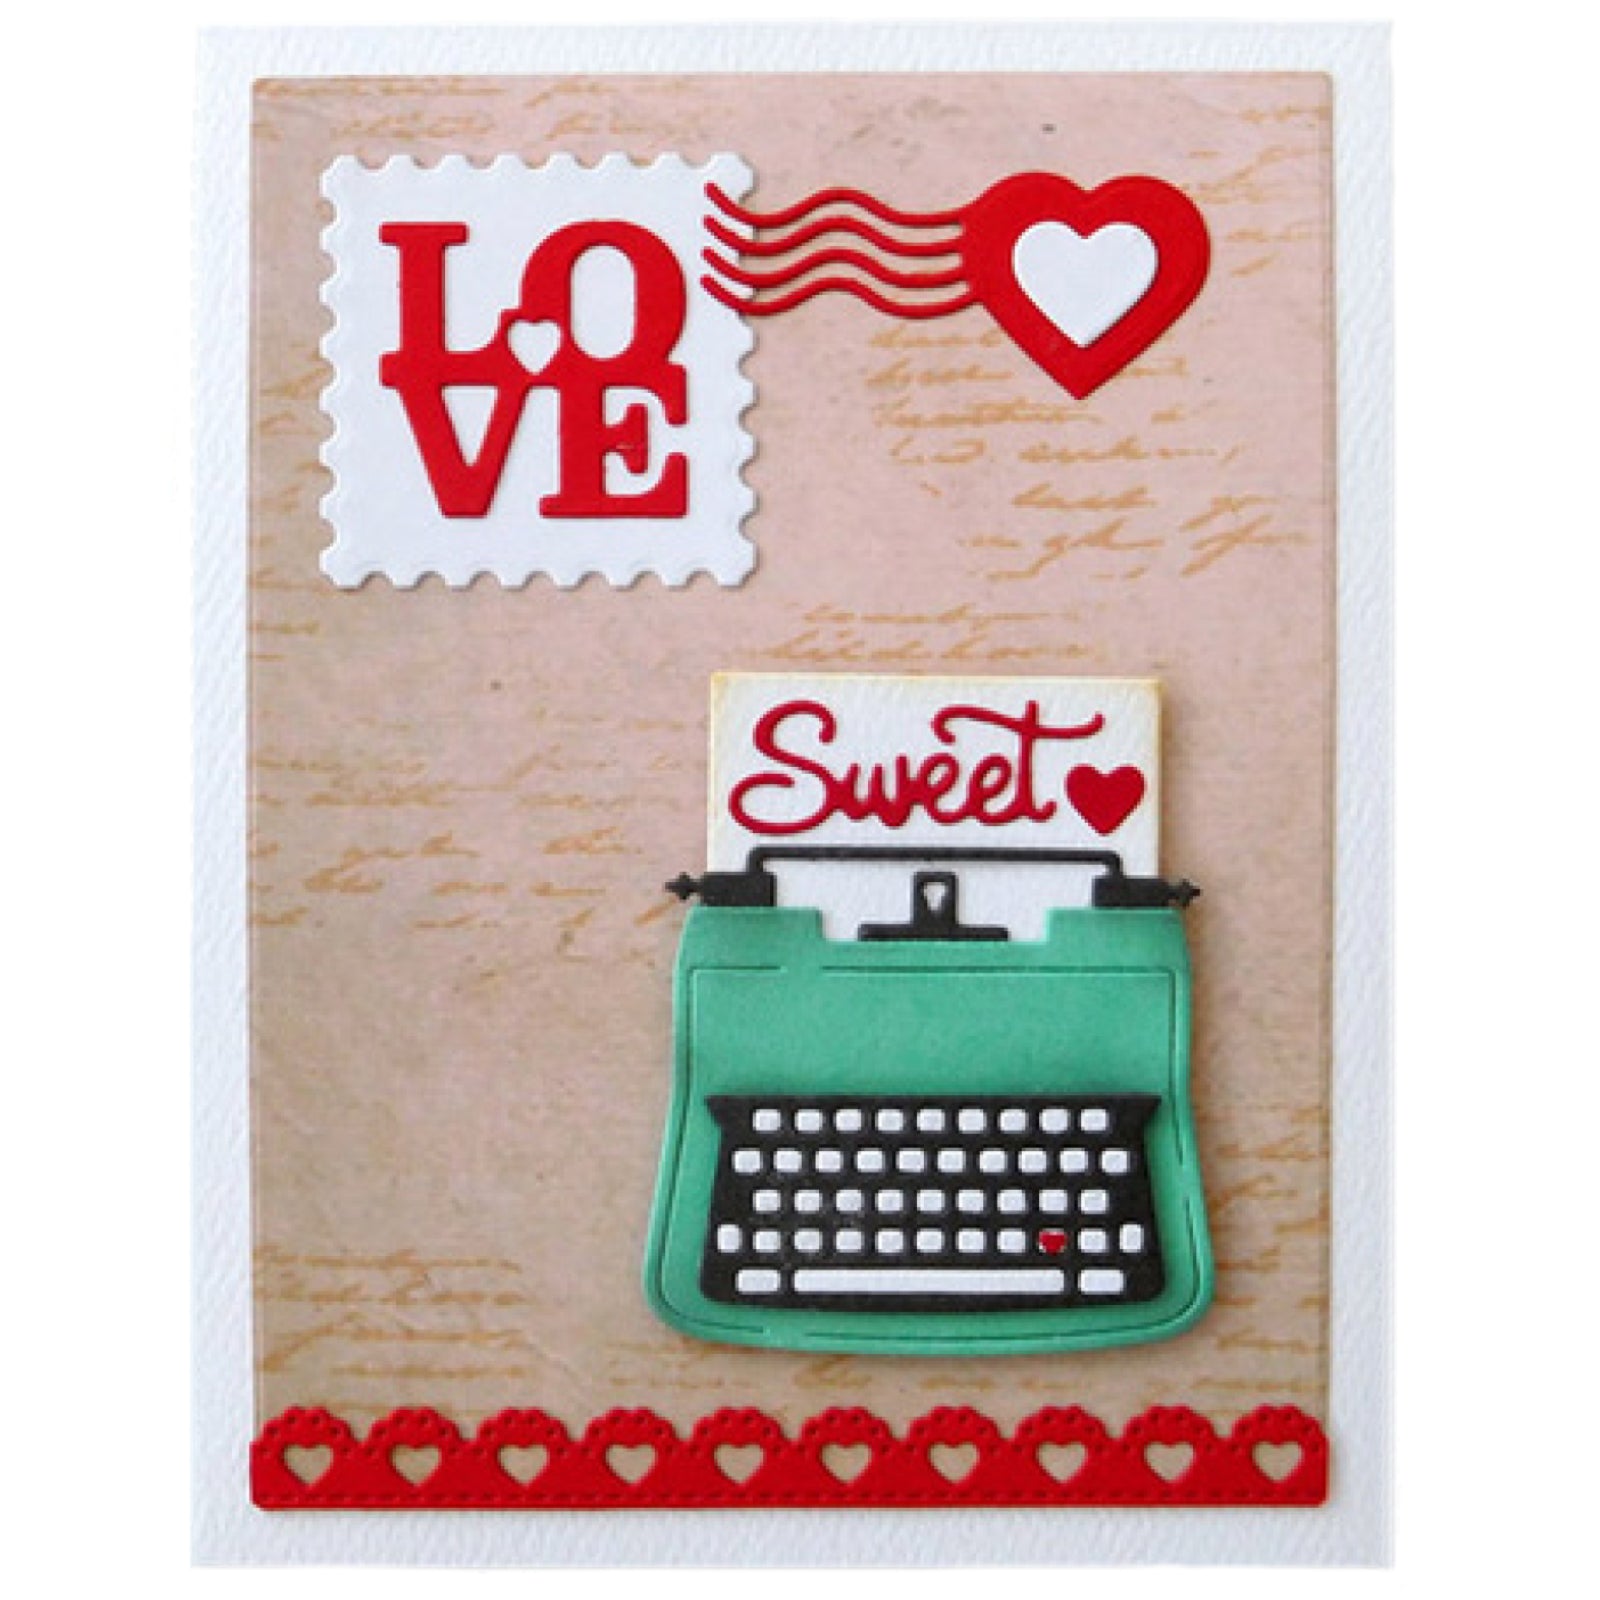 Love Stamp w Heart Postage Mark Cutting & Embossing Dies